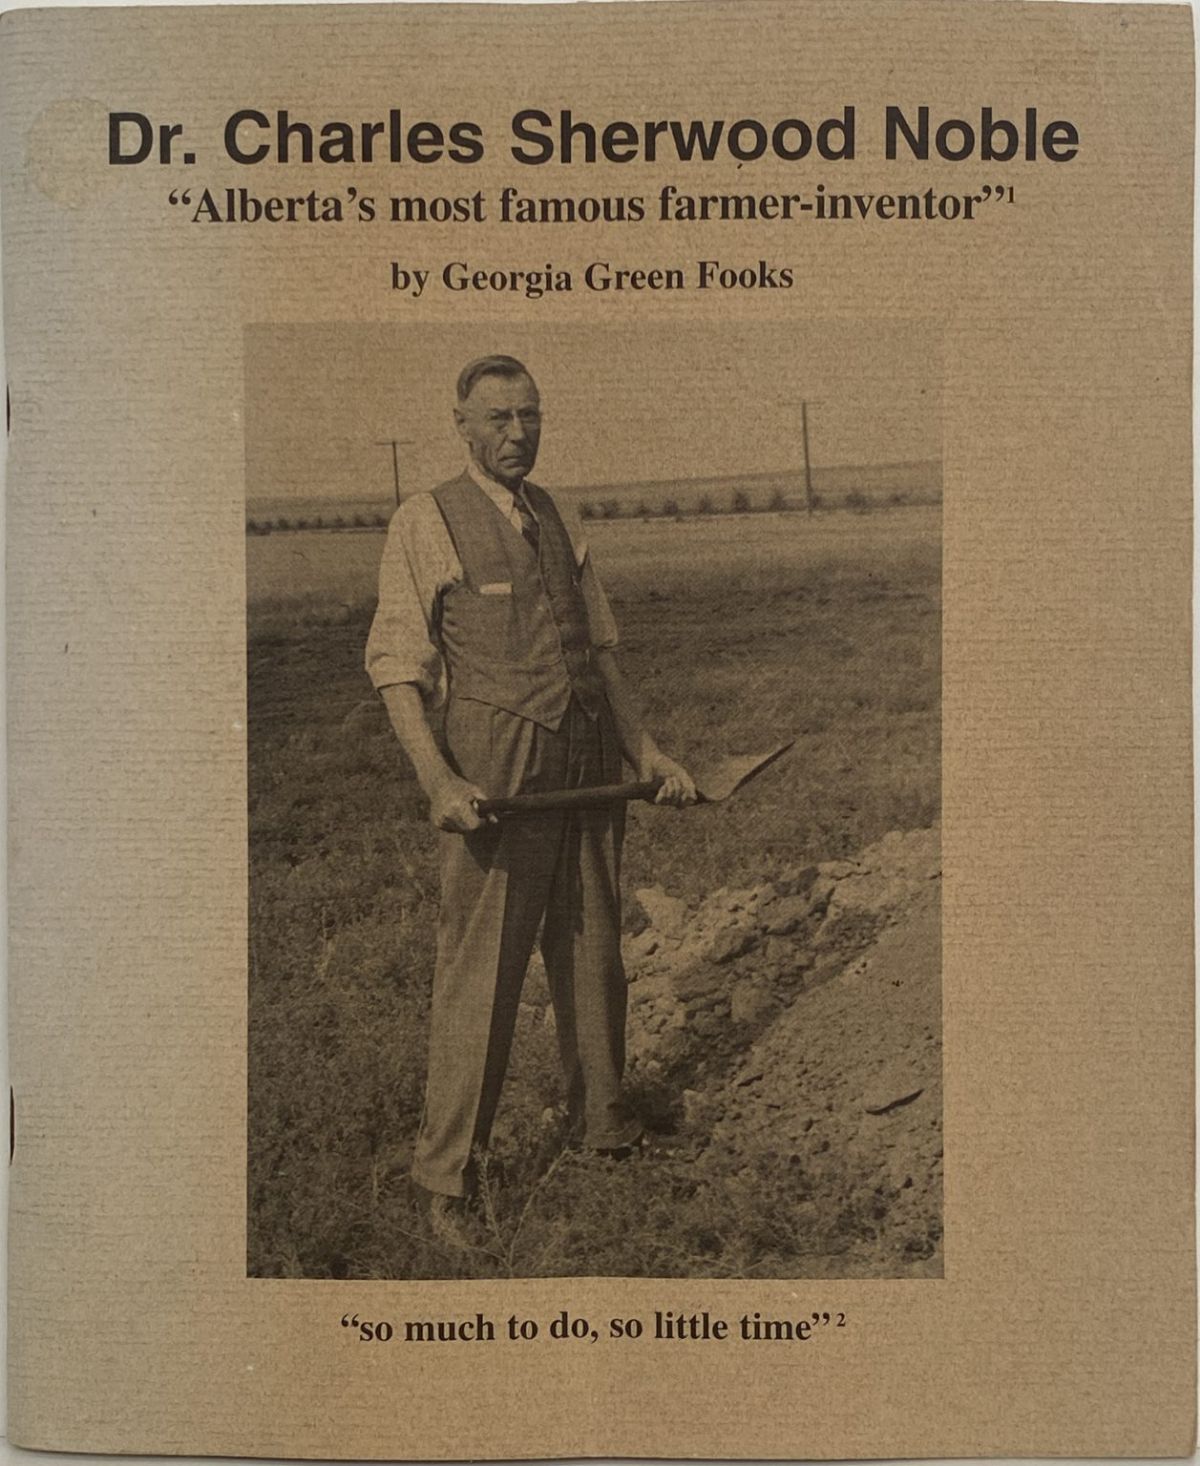 DR CHARLES SHERWOOD NOBLE: Alberta's most famous farmer-inventor